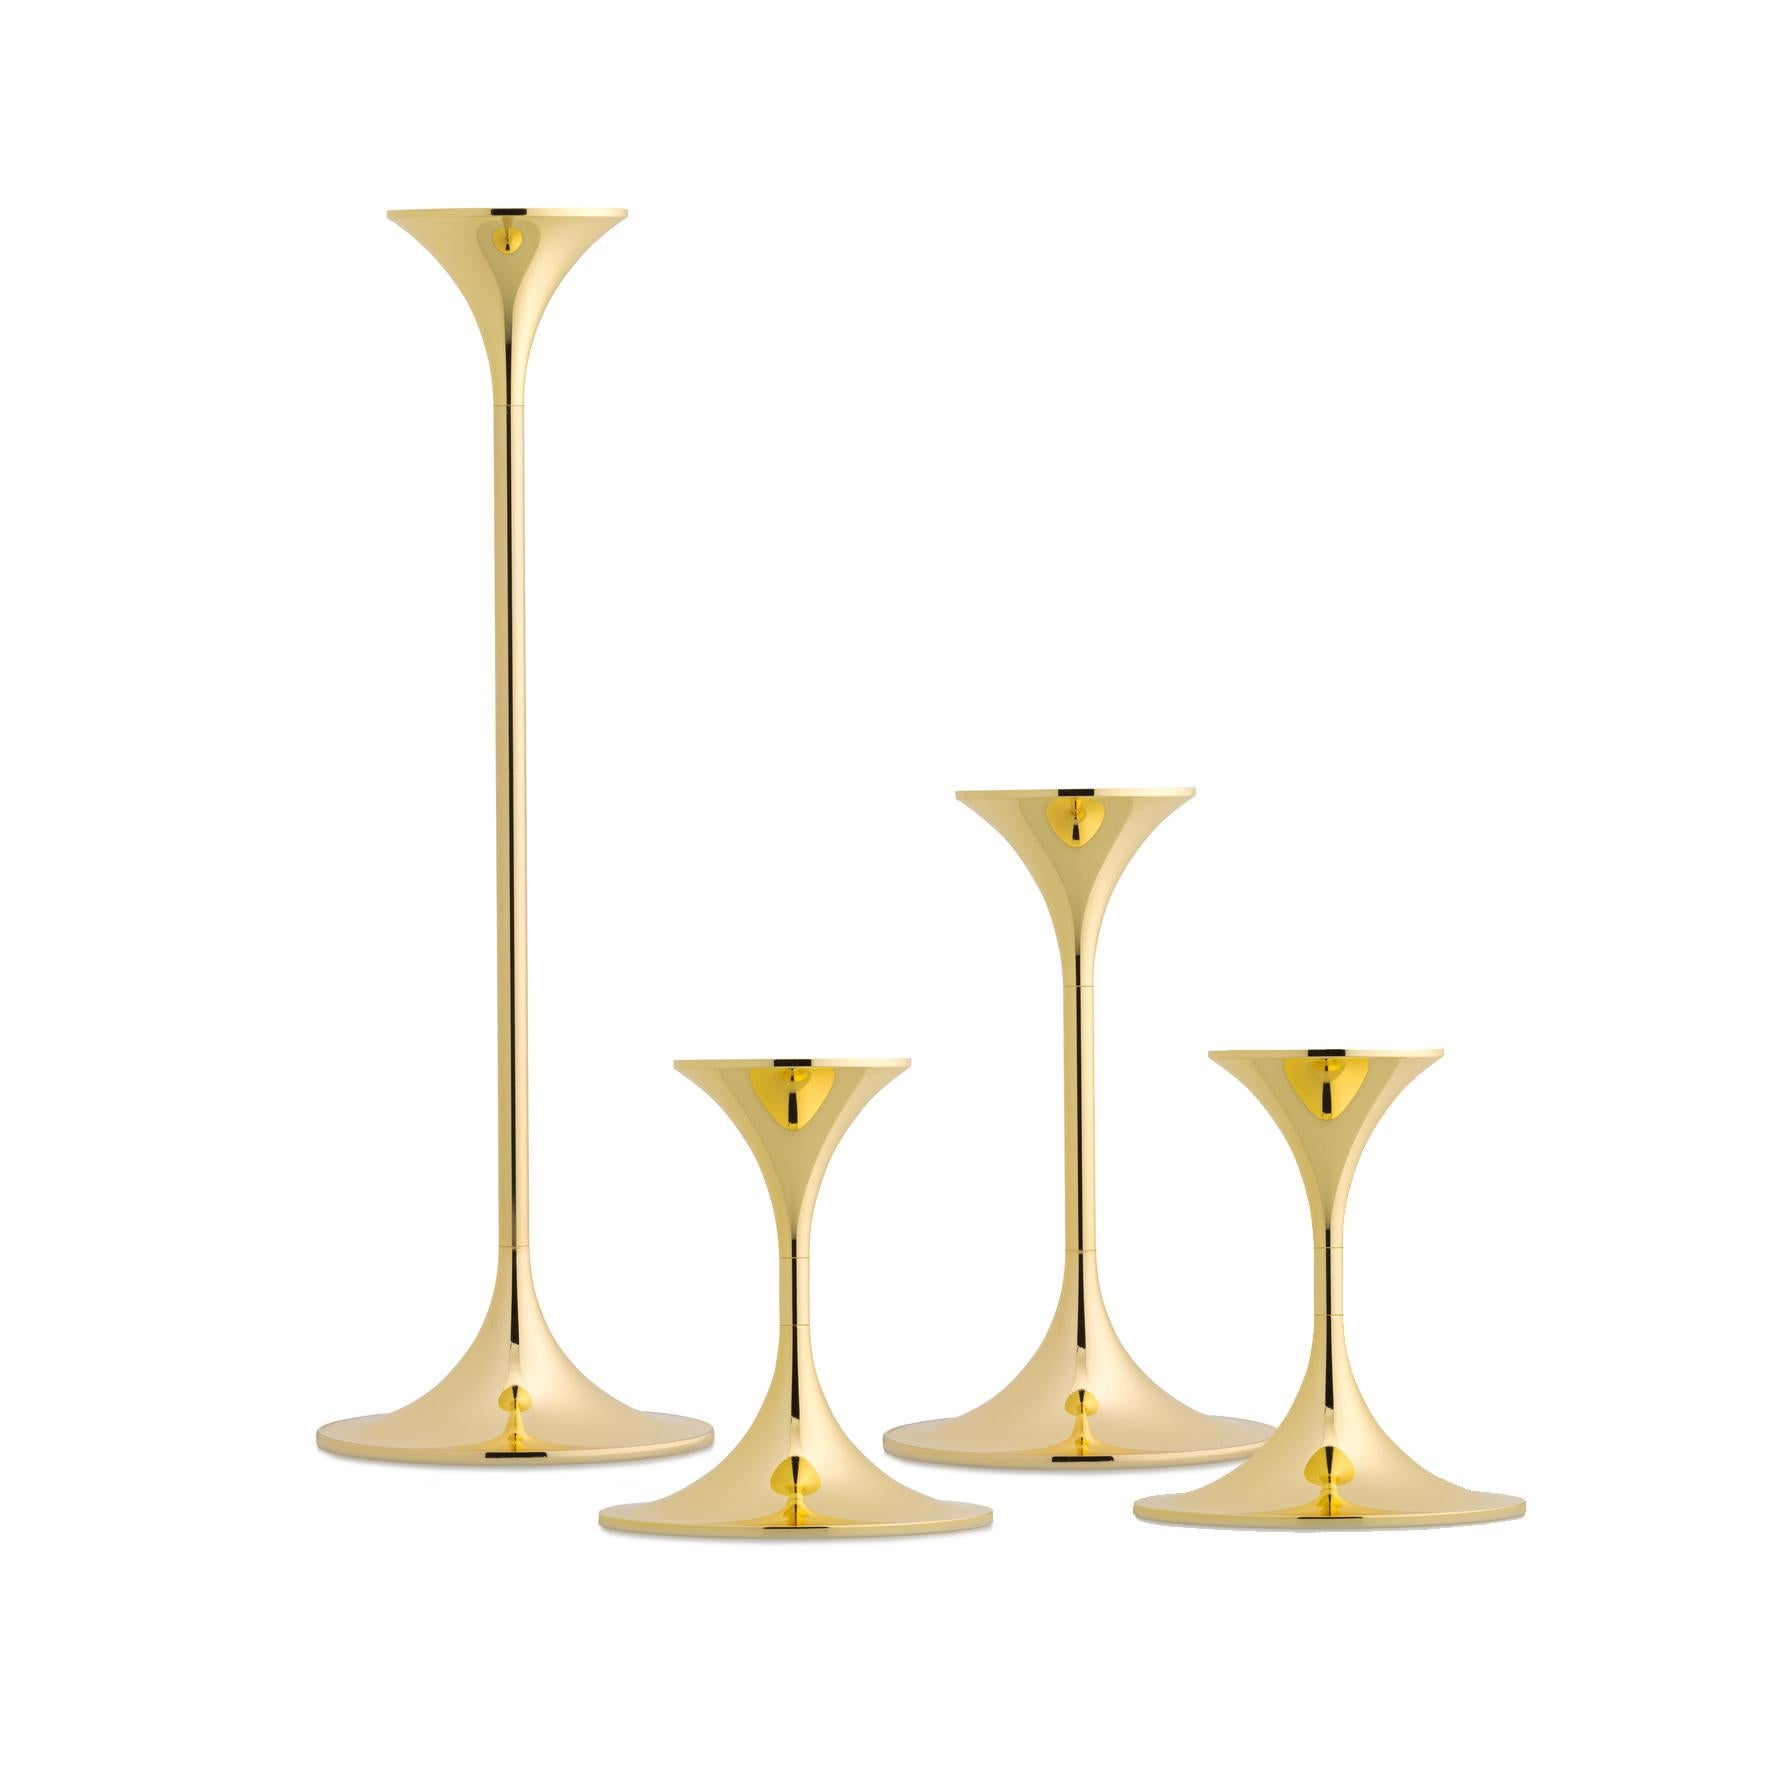 Set of Four Max Brüel 'Jazz' Candleholders, Steel with Brass by Karakter In New Condition For Sale In Barcelona, Barcelona